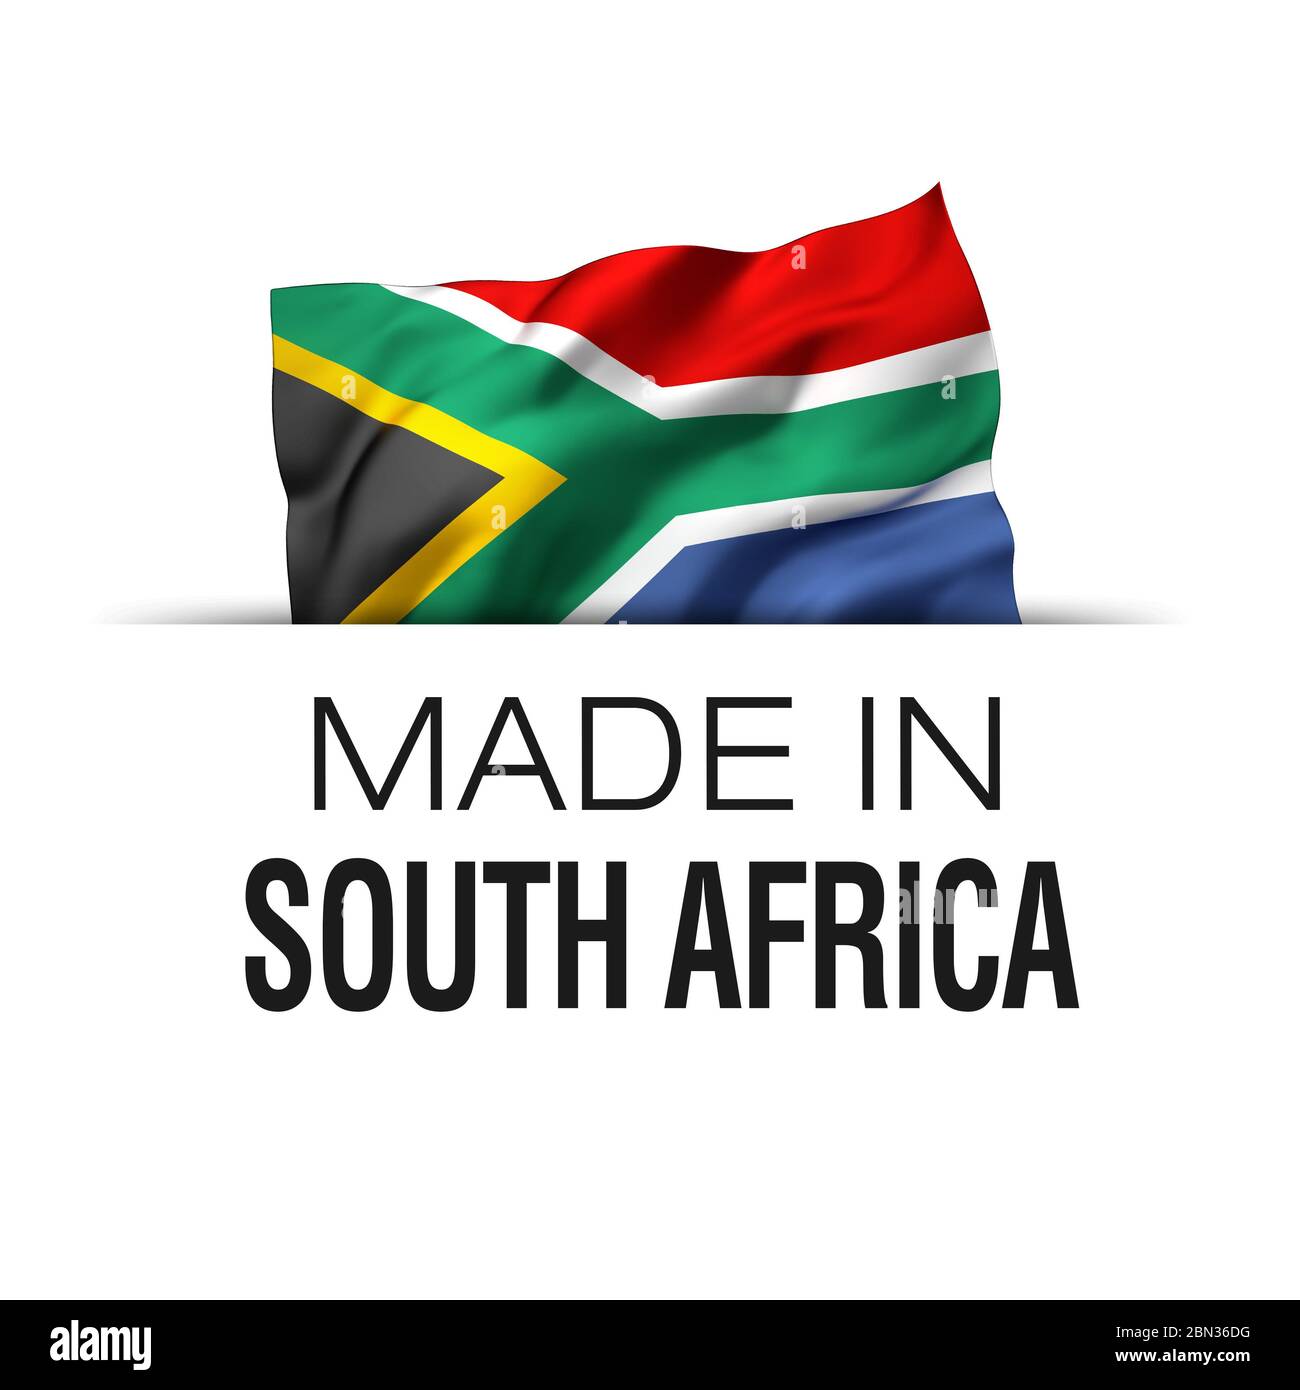 Made in South Africa - Guarantee label with a waving South African flag. 3D illustration. Stock Photo